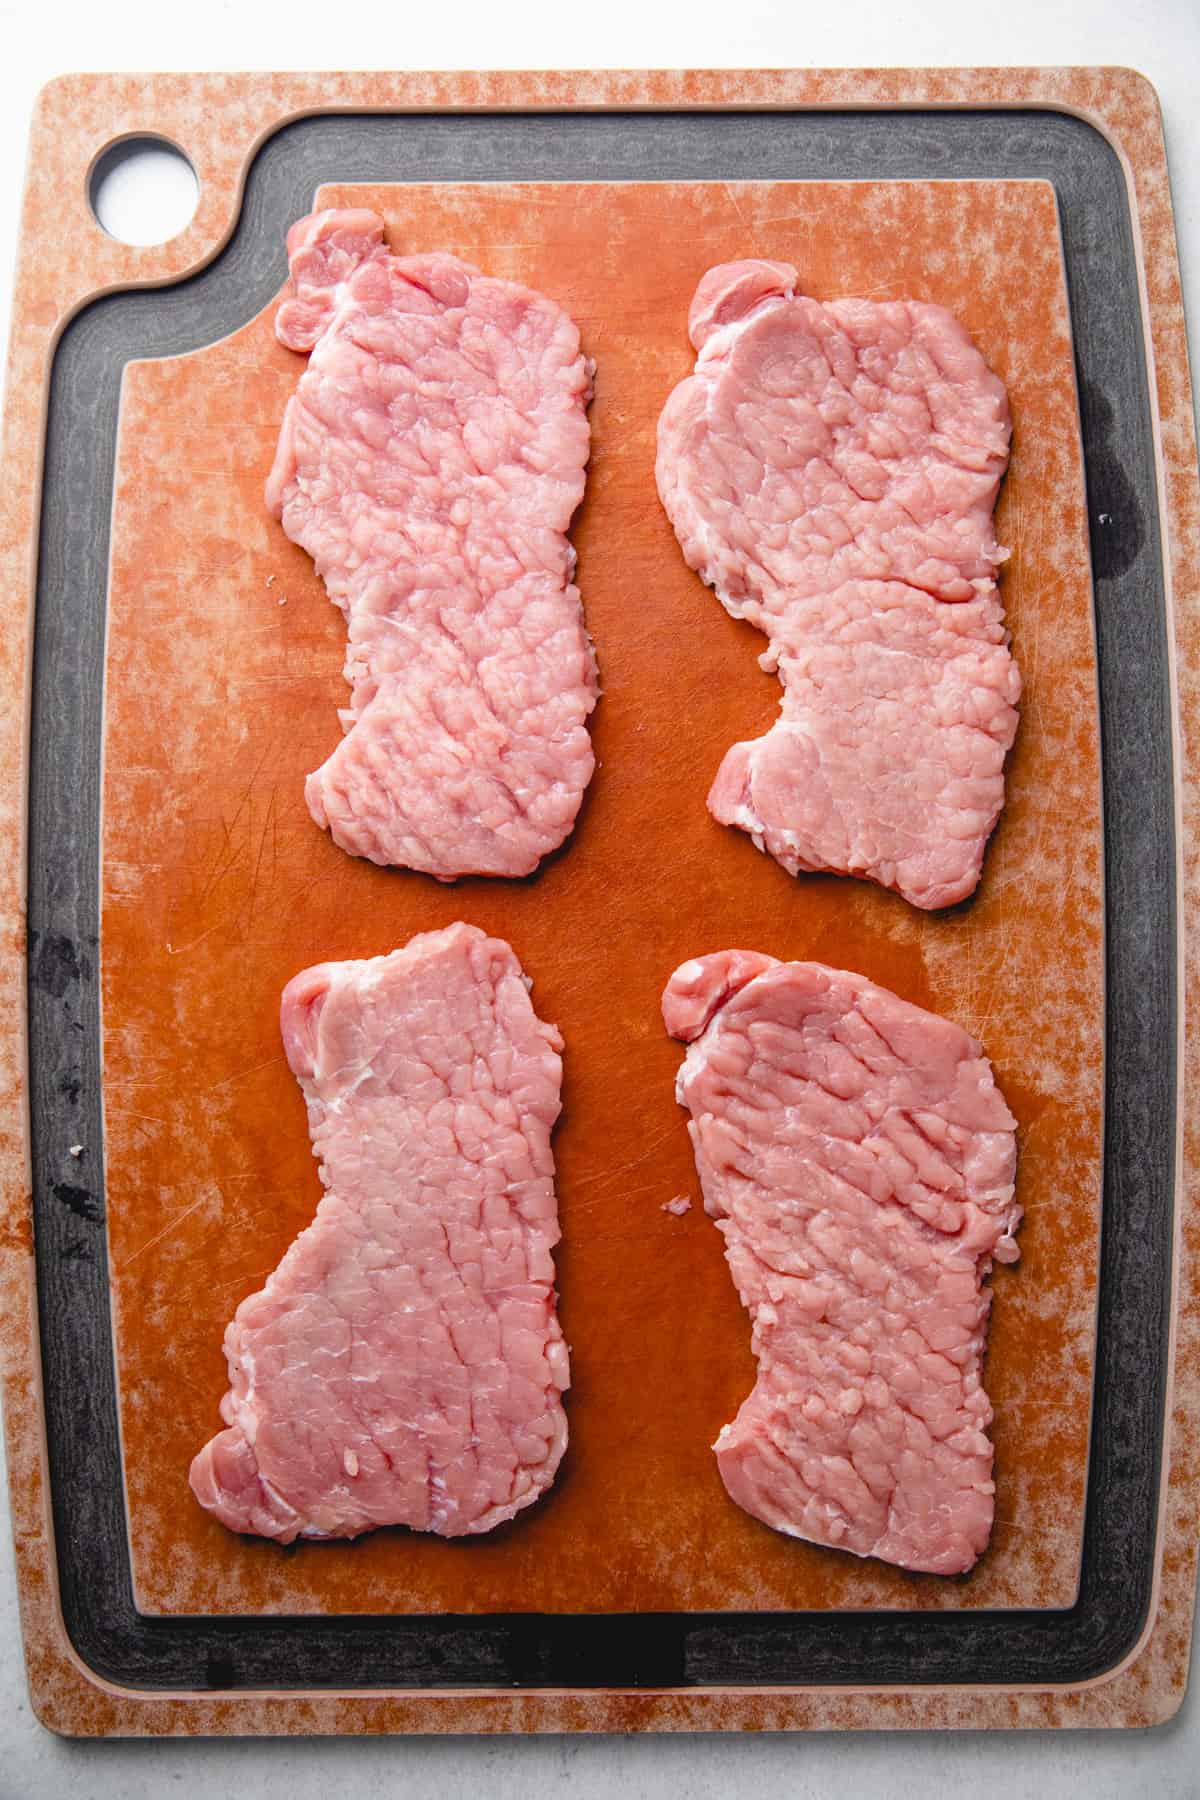 Pounded pork chops on a cutting board.